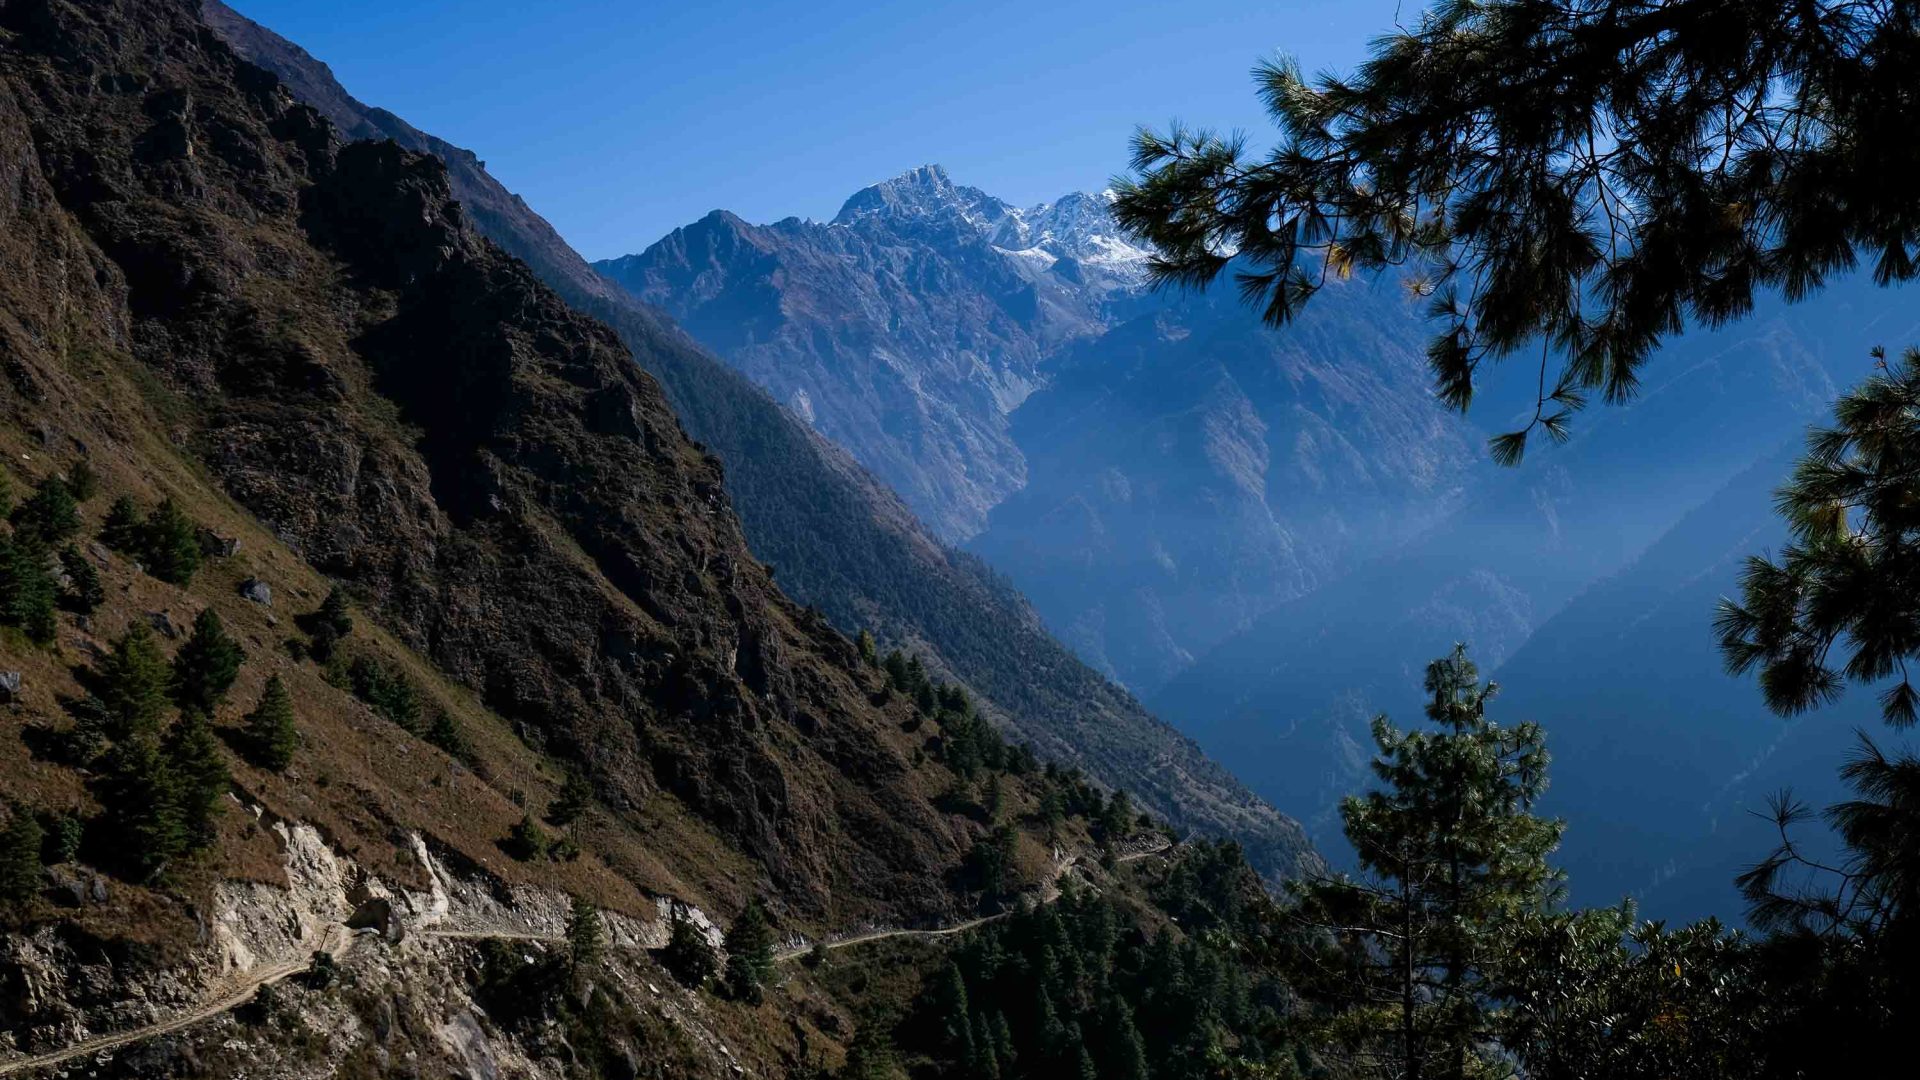 A path winds through the Langtang Valley.